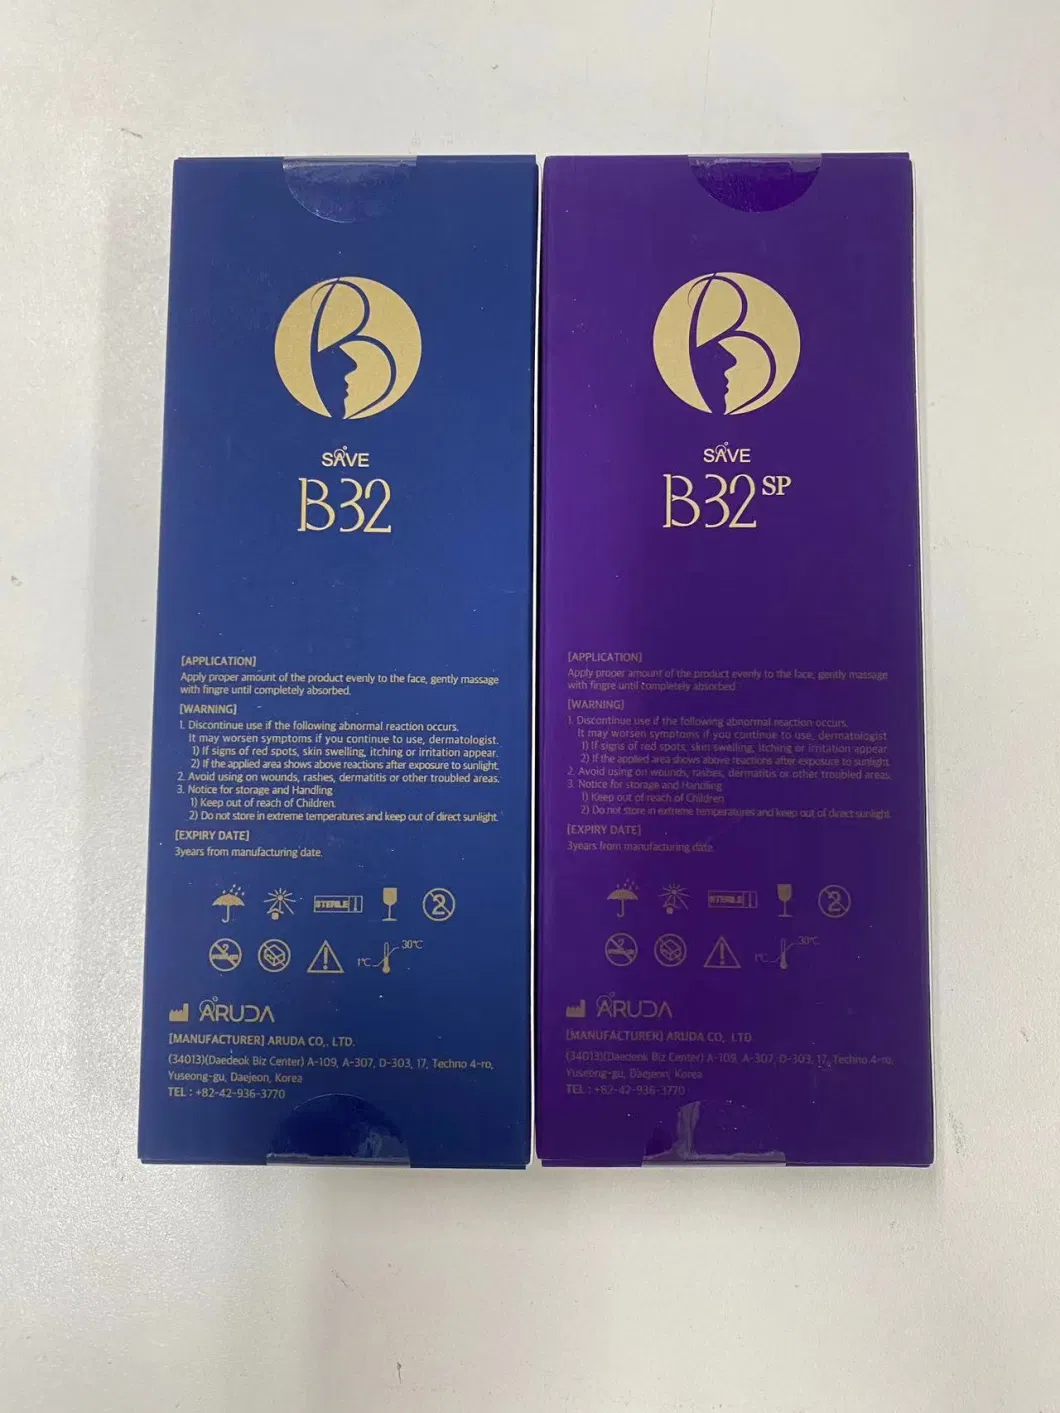 Korea Hot Sale Hyaluronic Acid Injection Save B32 Save B32sp 2.5ml Face Lifting 5 Point Face Neck 7 Point Profhilo Nucleofill Bellona Injection